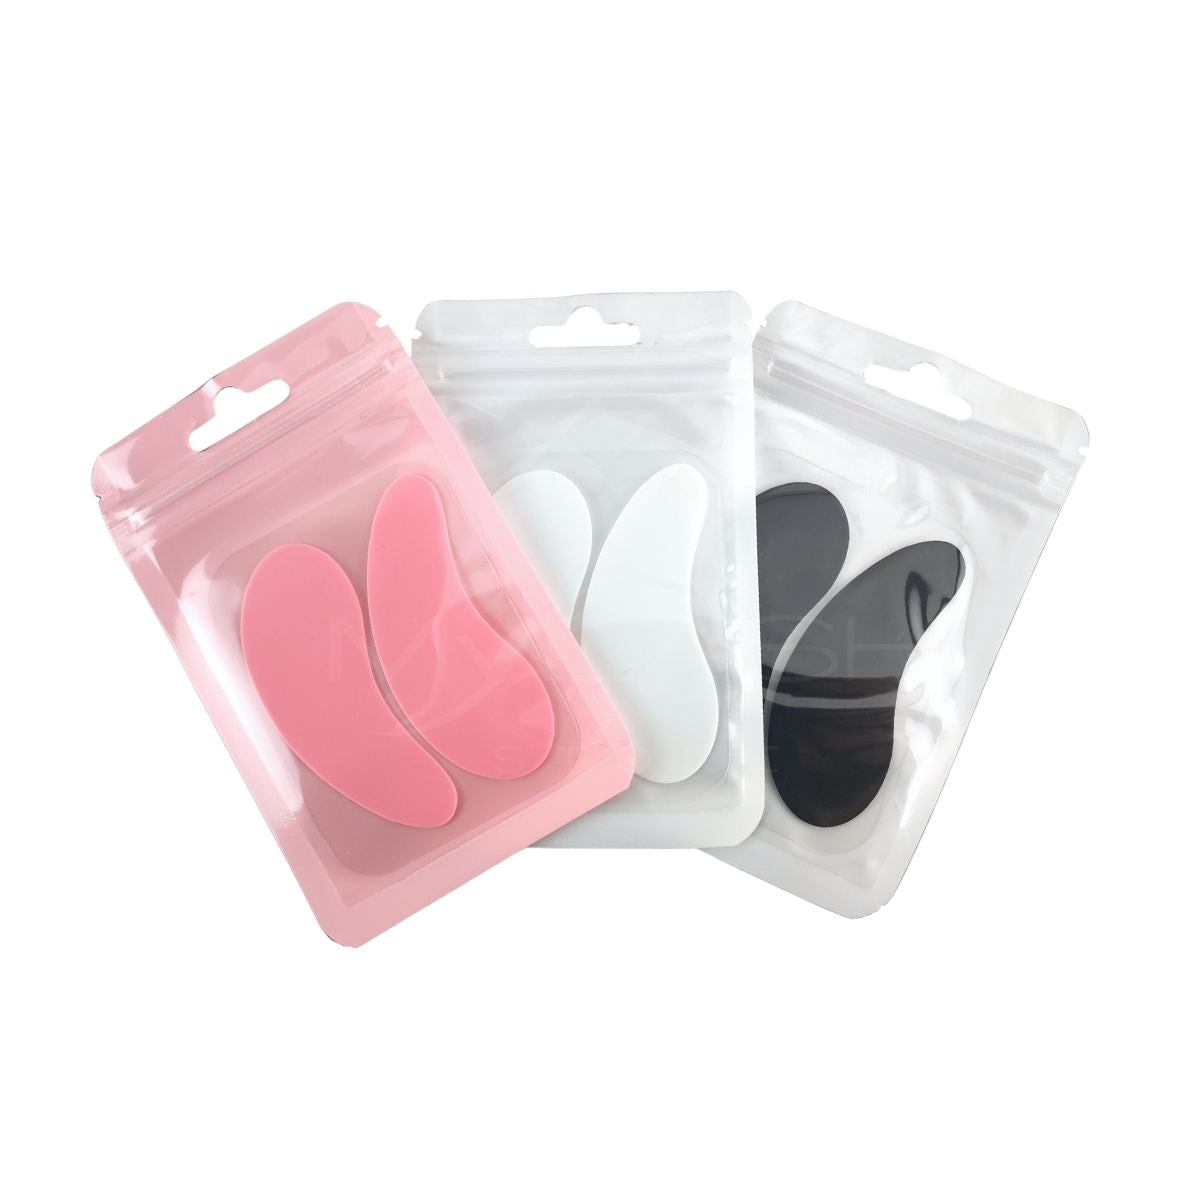 Reusable Silicone Under Eye Pads - My Lash Store